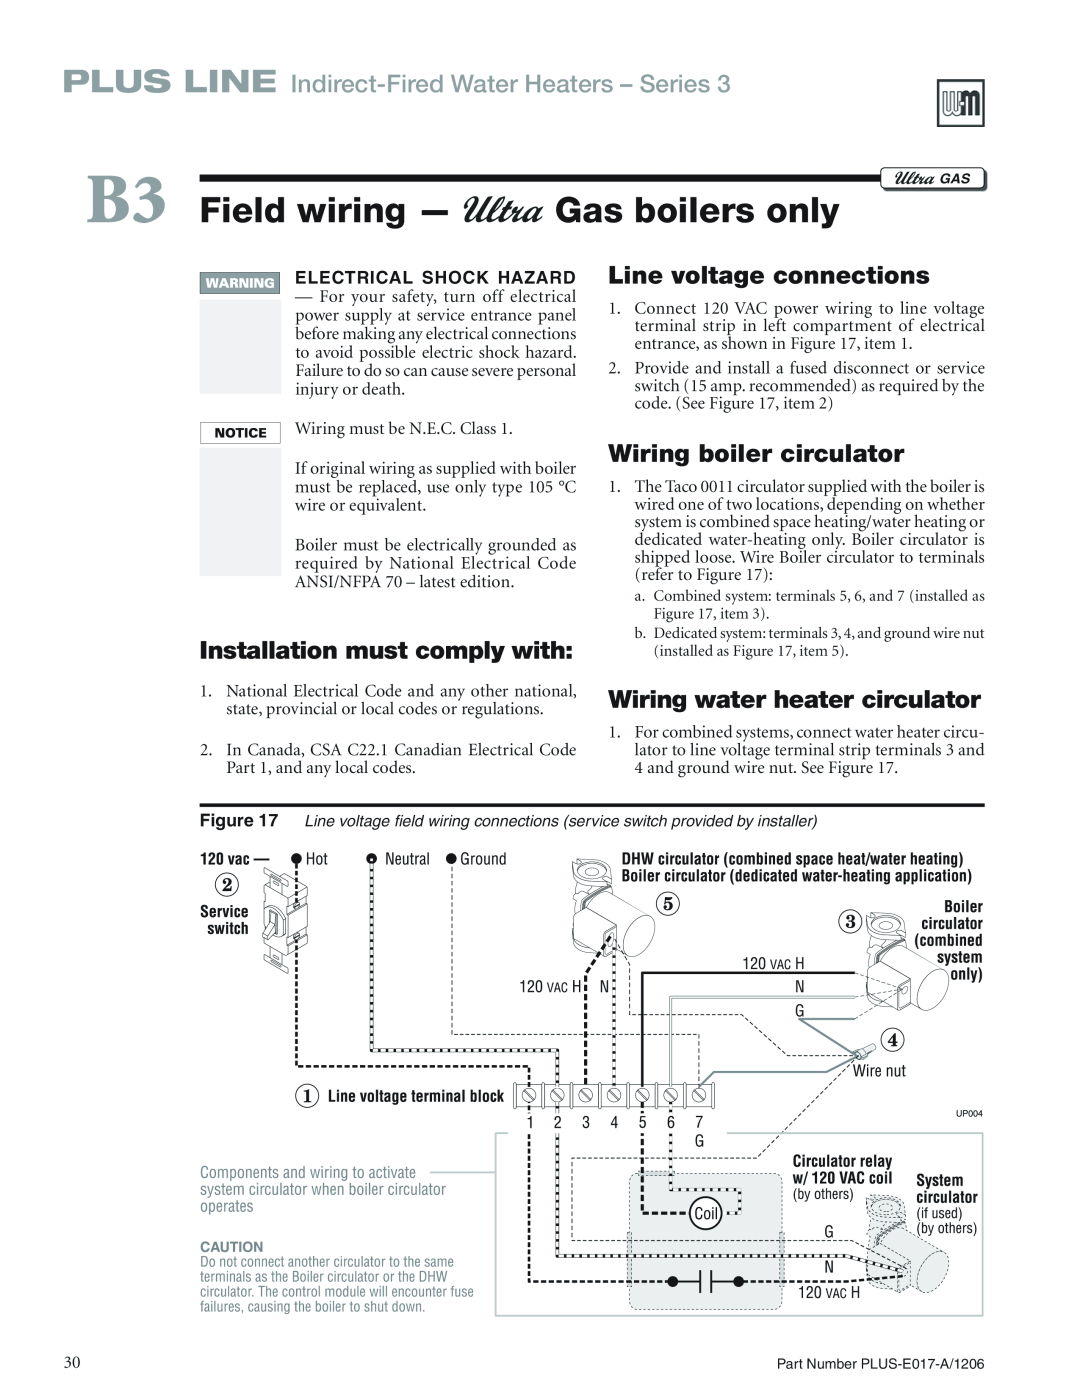 Weil-McLain PLUS-E017-A/1206 B3 Field wiring, Gas boilers only, Installation must comply with, Line voltage connections 